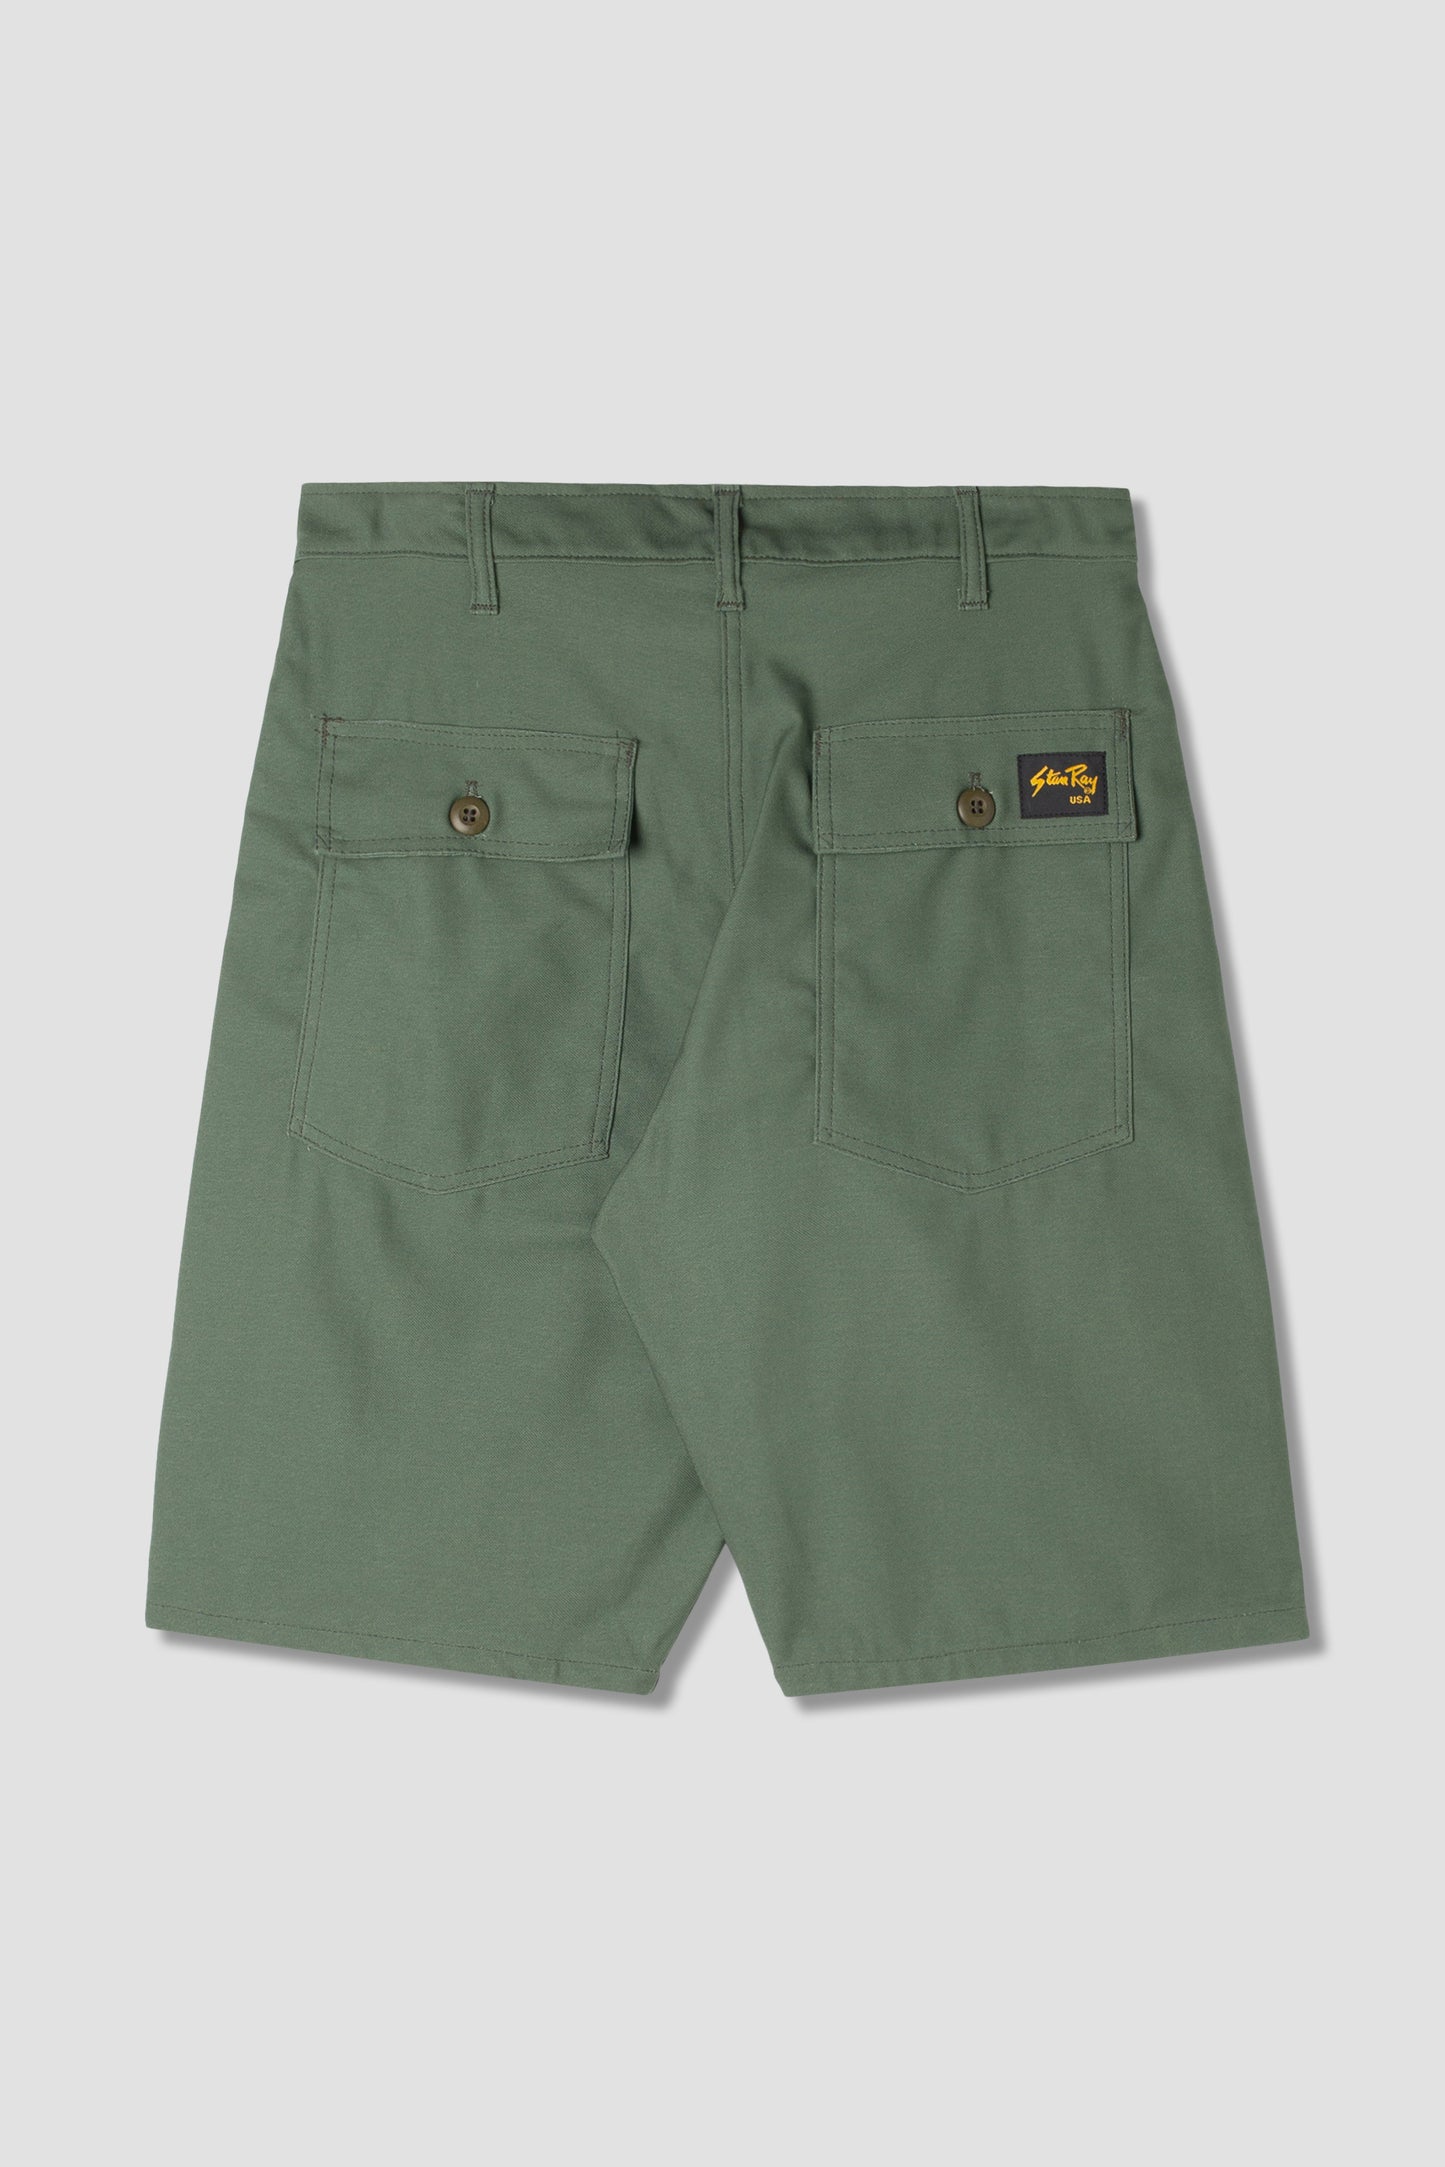 Fatigue Short (Olive Sateen 8.5oz) - Stan Ray